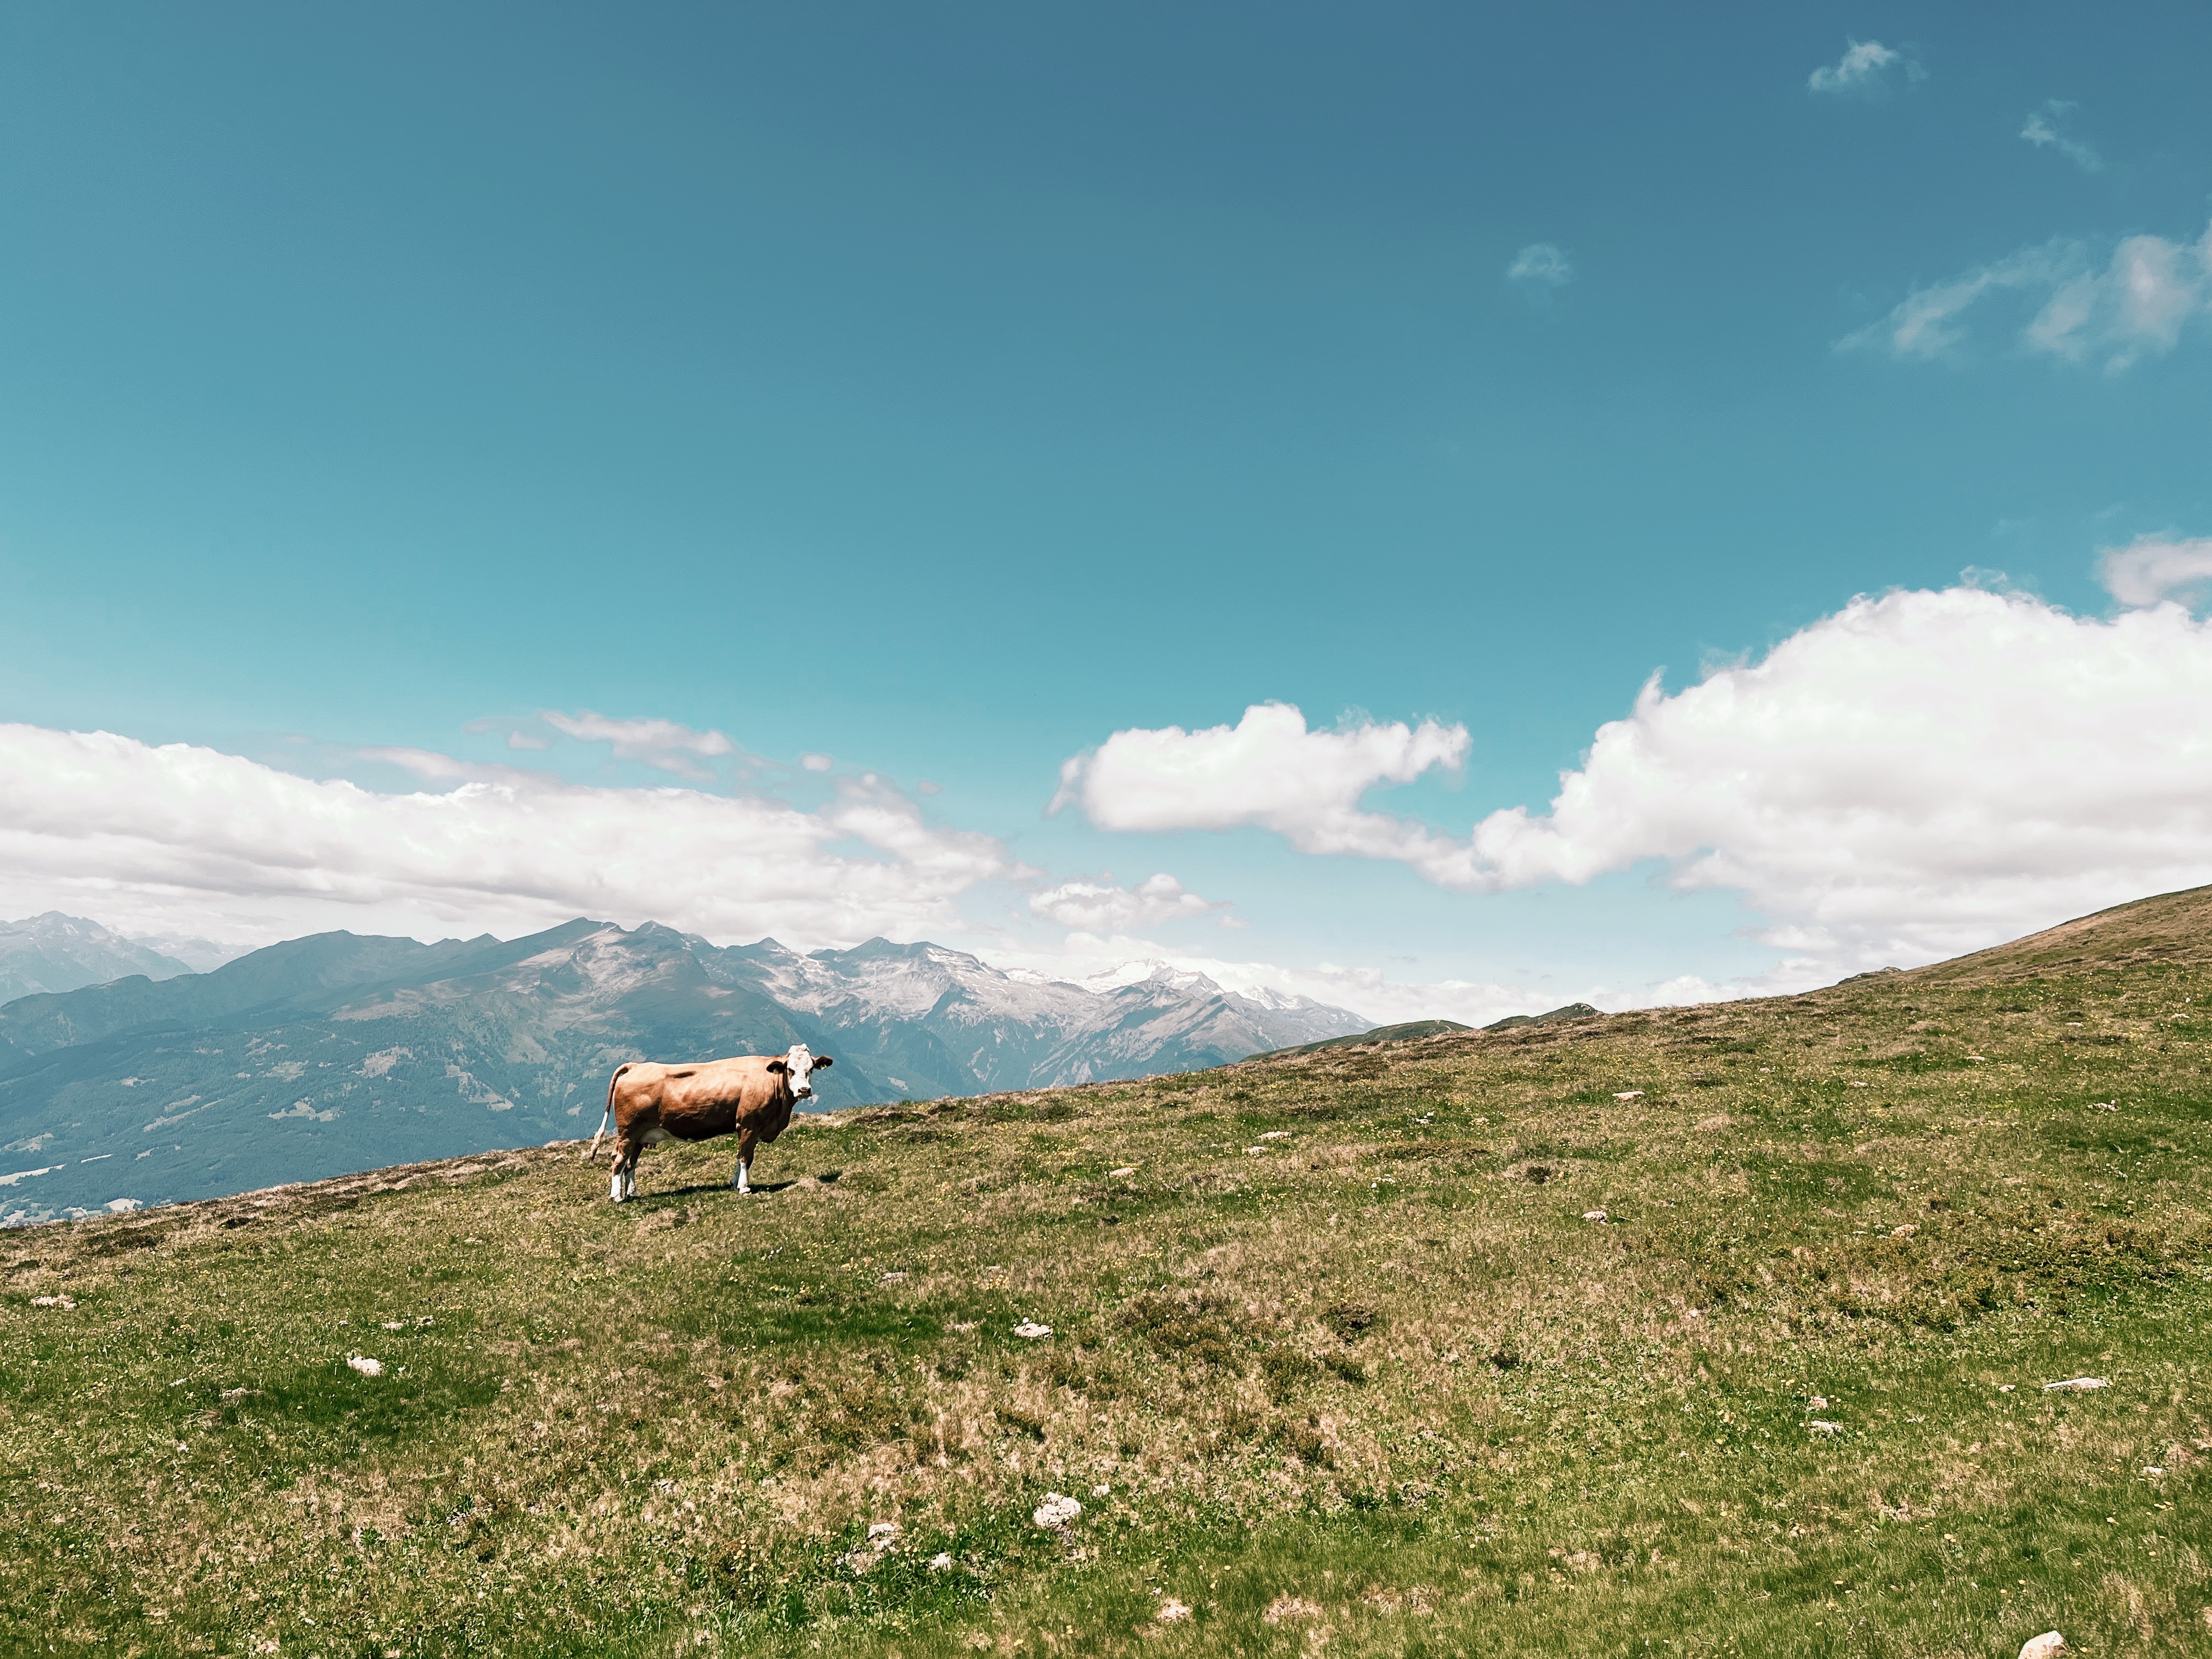 Cow in front of mountain scenary on the Alpe Adria Trail, a long-distance hiking trail in Europe